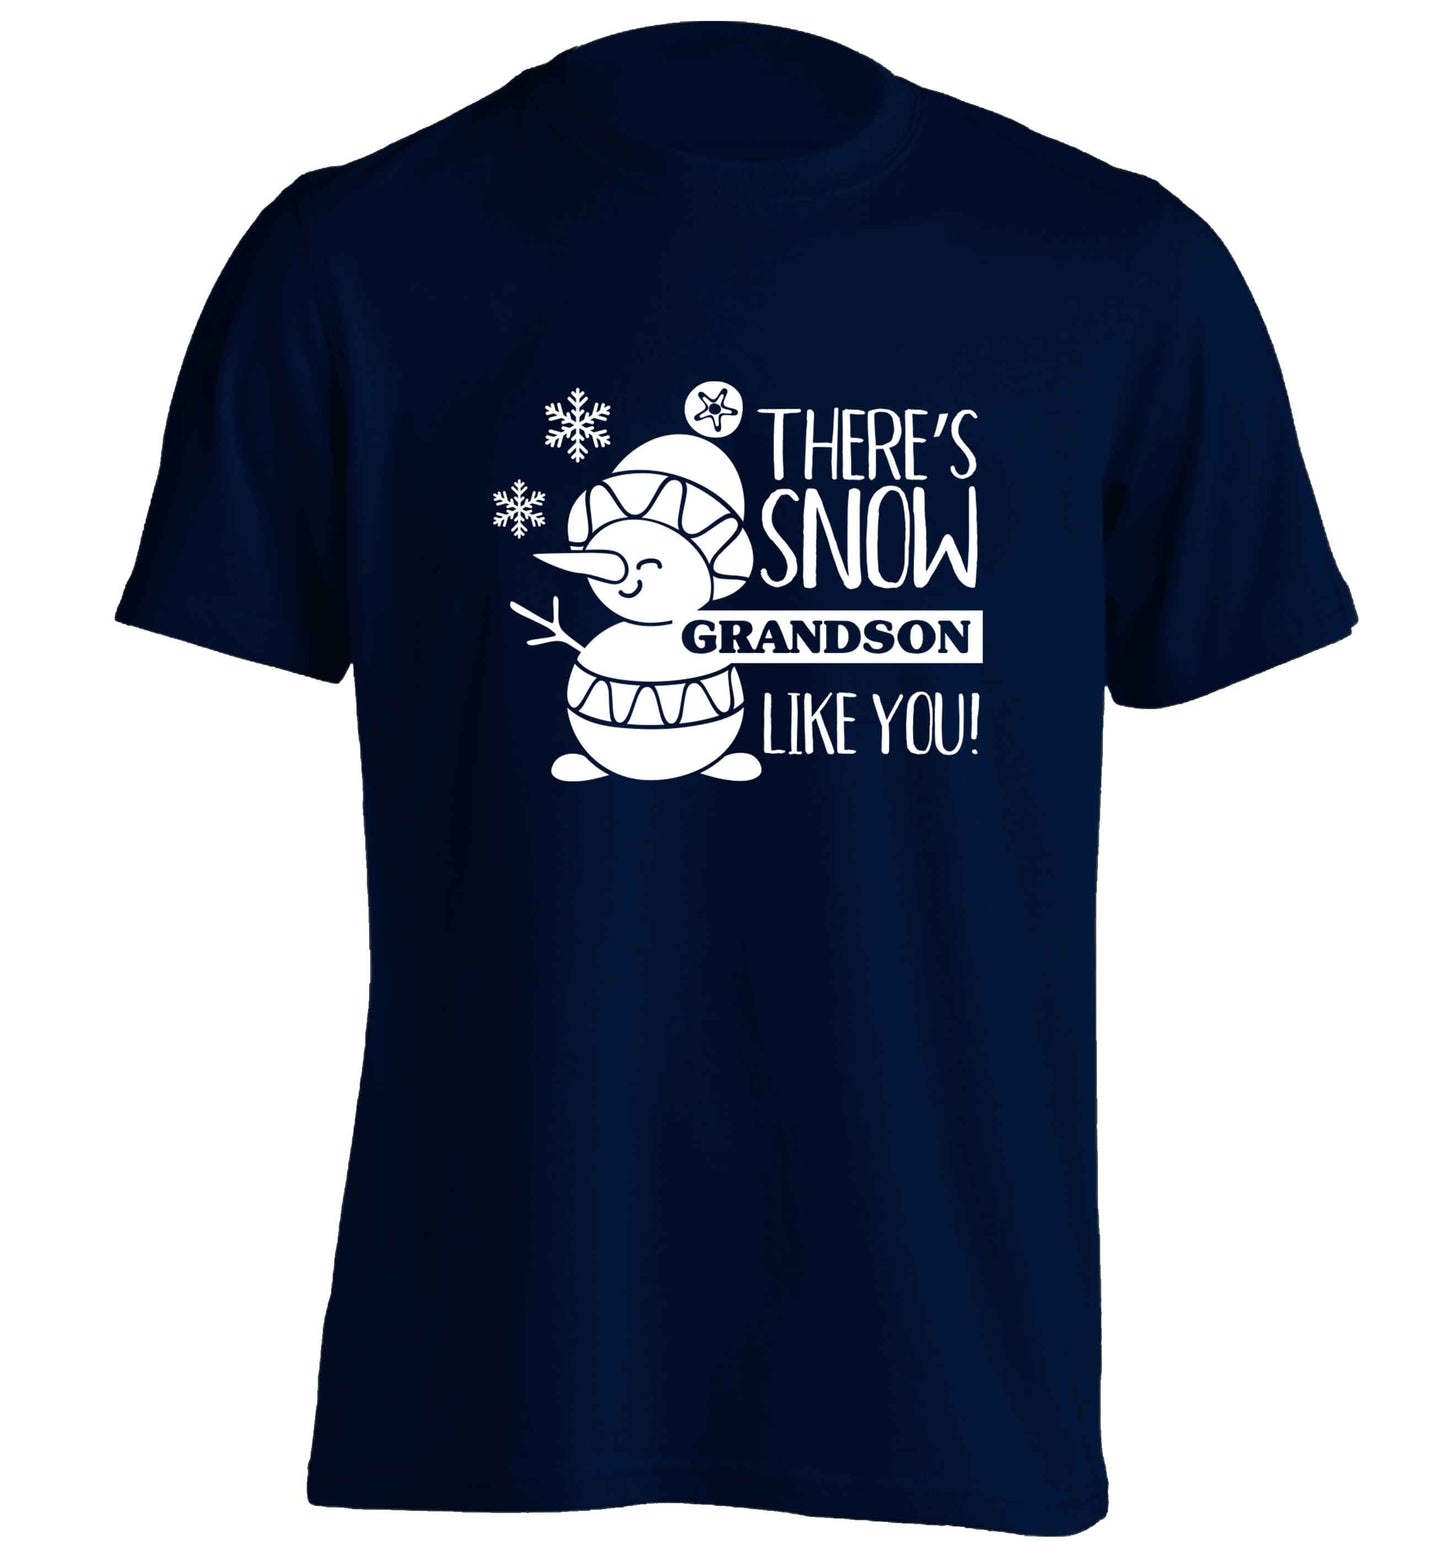 There's snow grandson like you adults unisex navy Tshirt 2XL